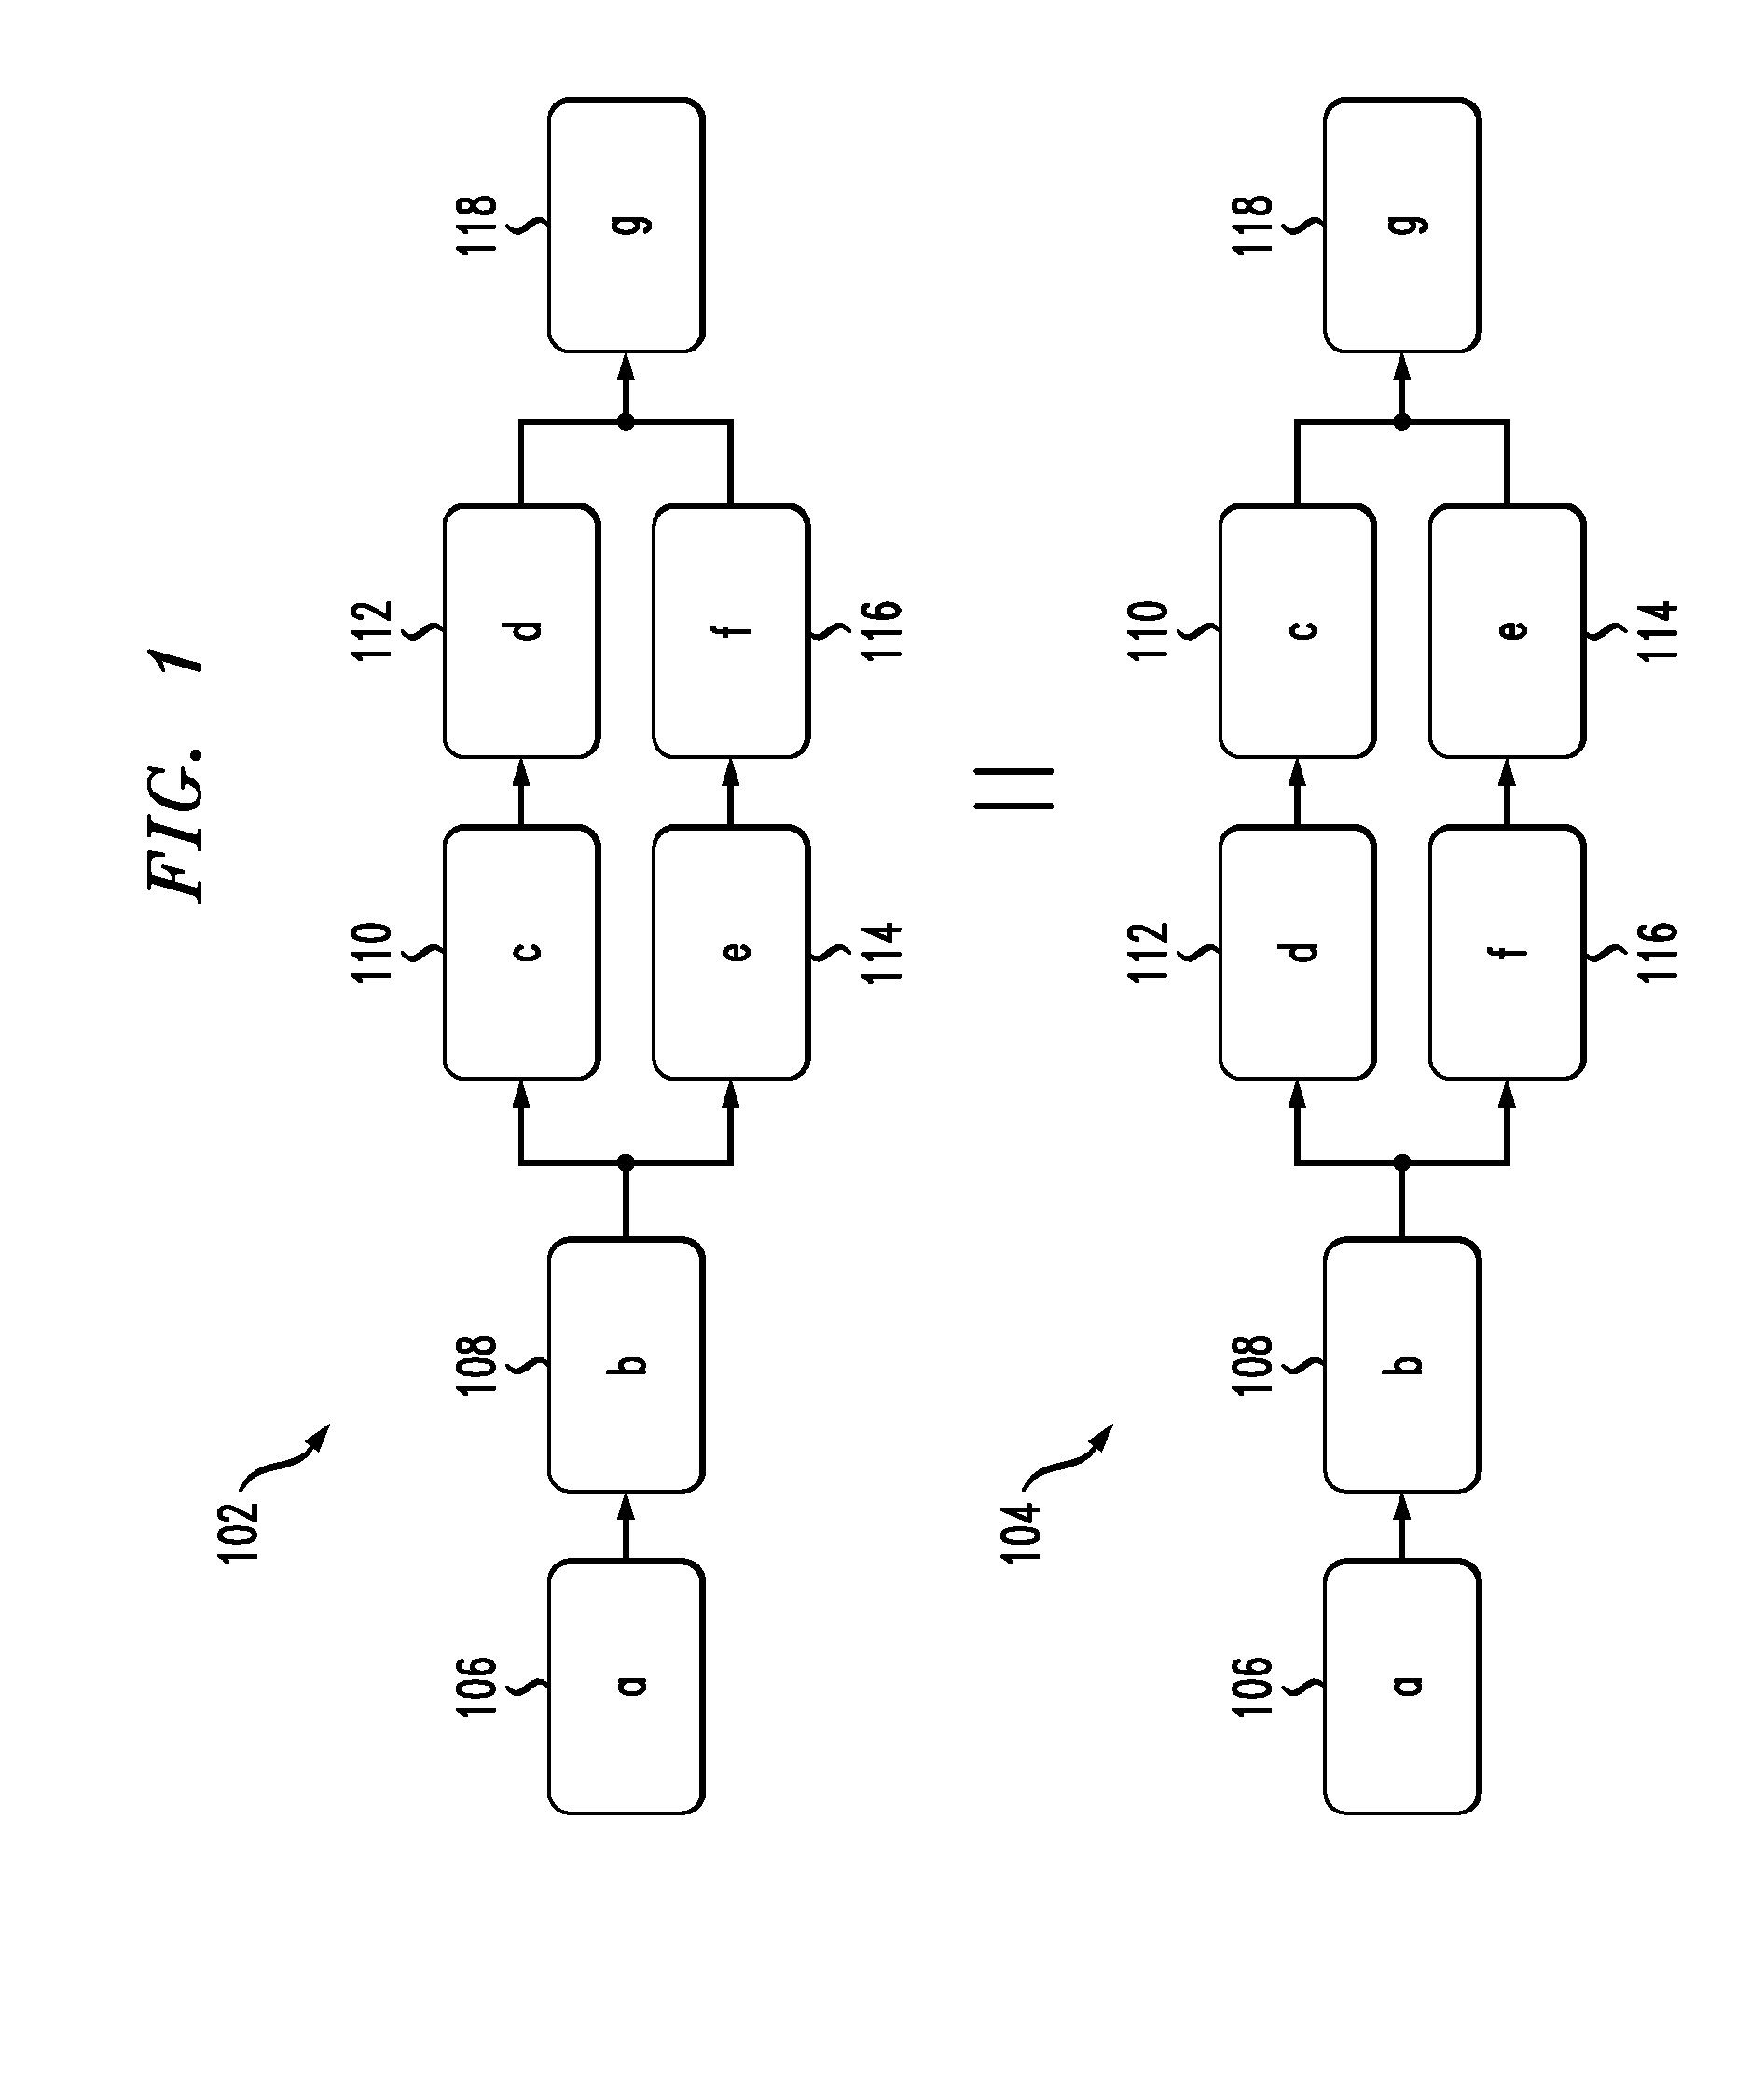 System and method for constructing flexible ordering to improve productivity and efficiency in process flows